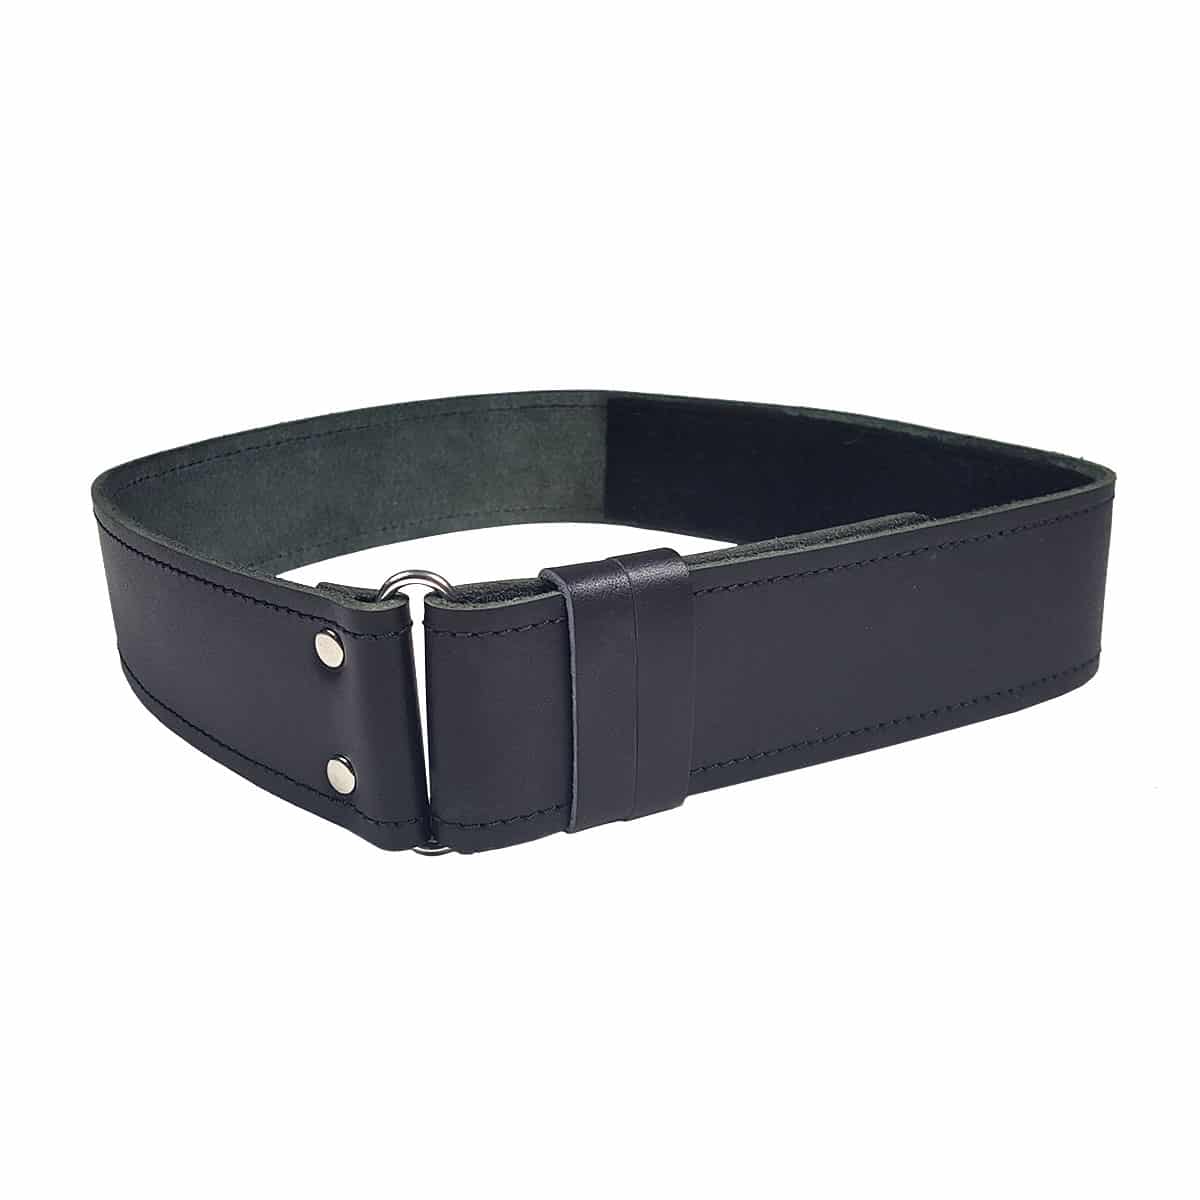 A Standard Smooth Leather Kilt Belt with a metal buckle.